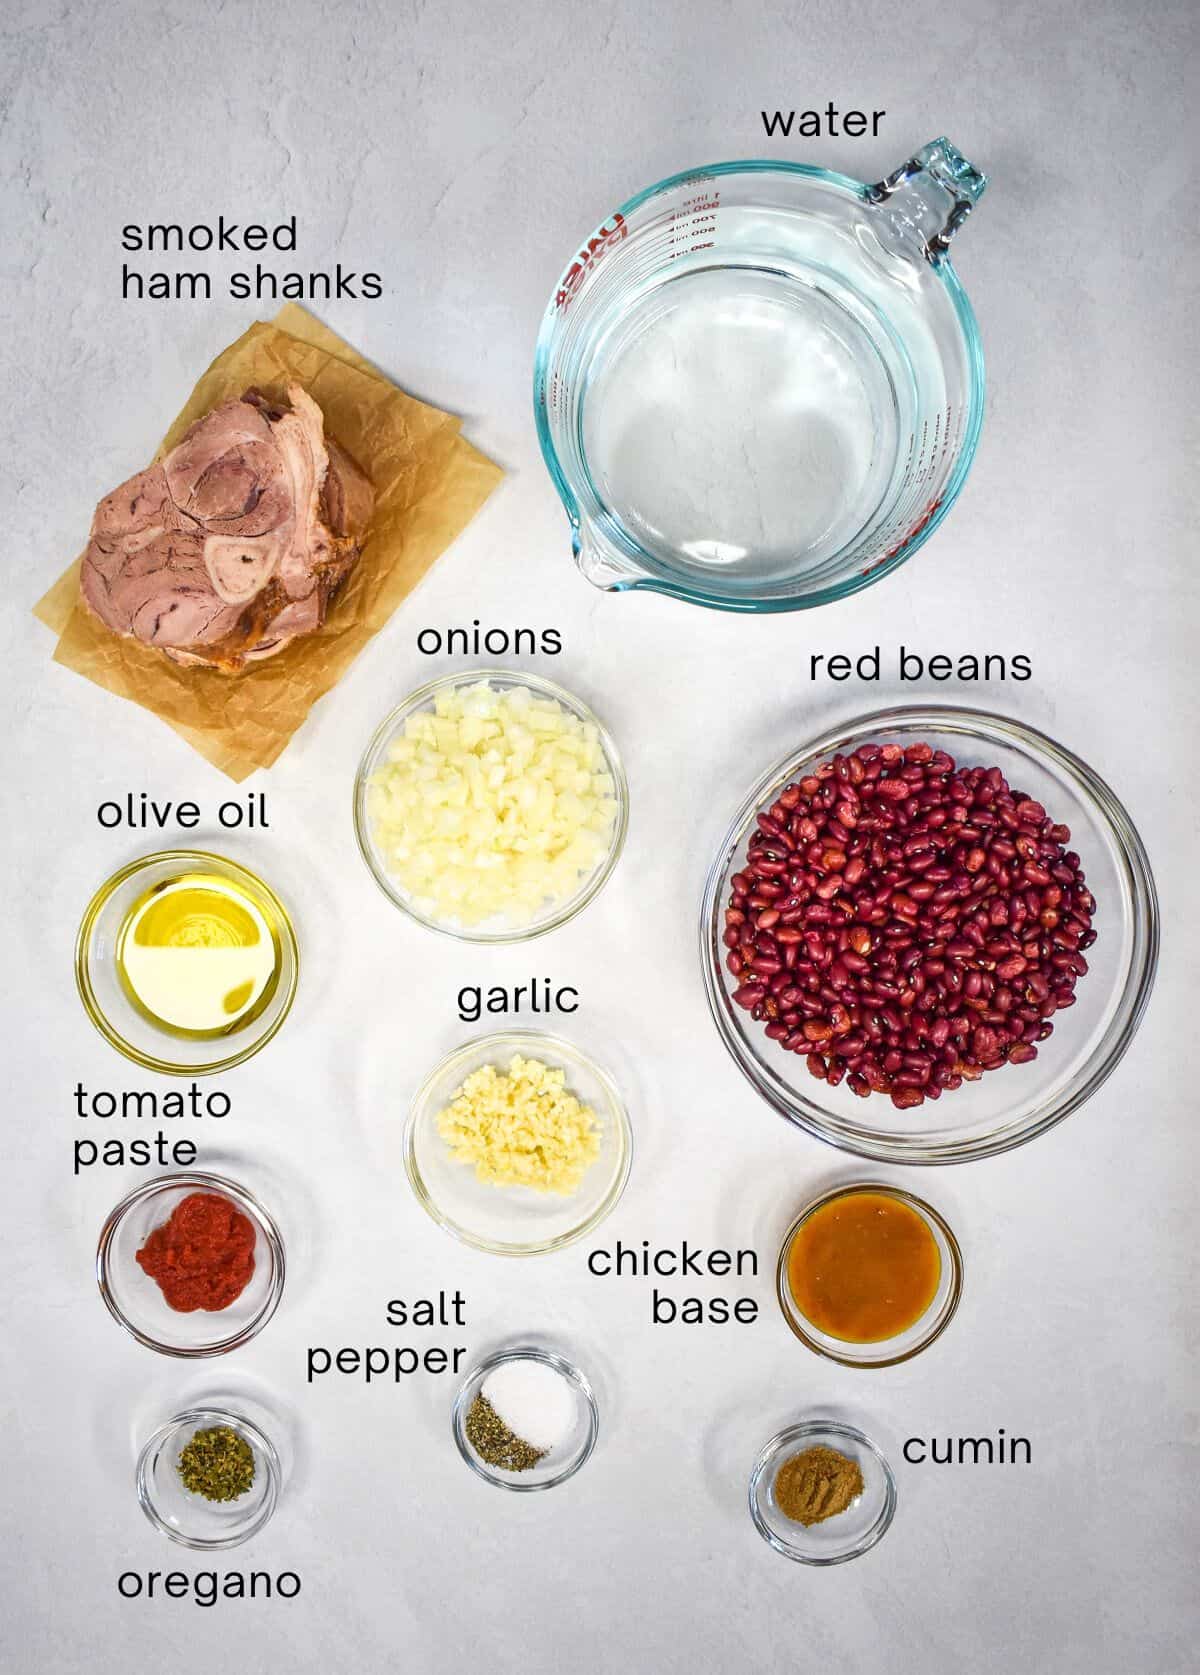 The ingredients for the red beans arranged in glass bowls on a white table with each one labeled in small black letters.